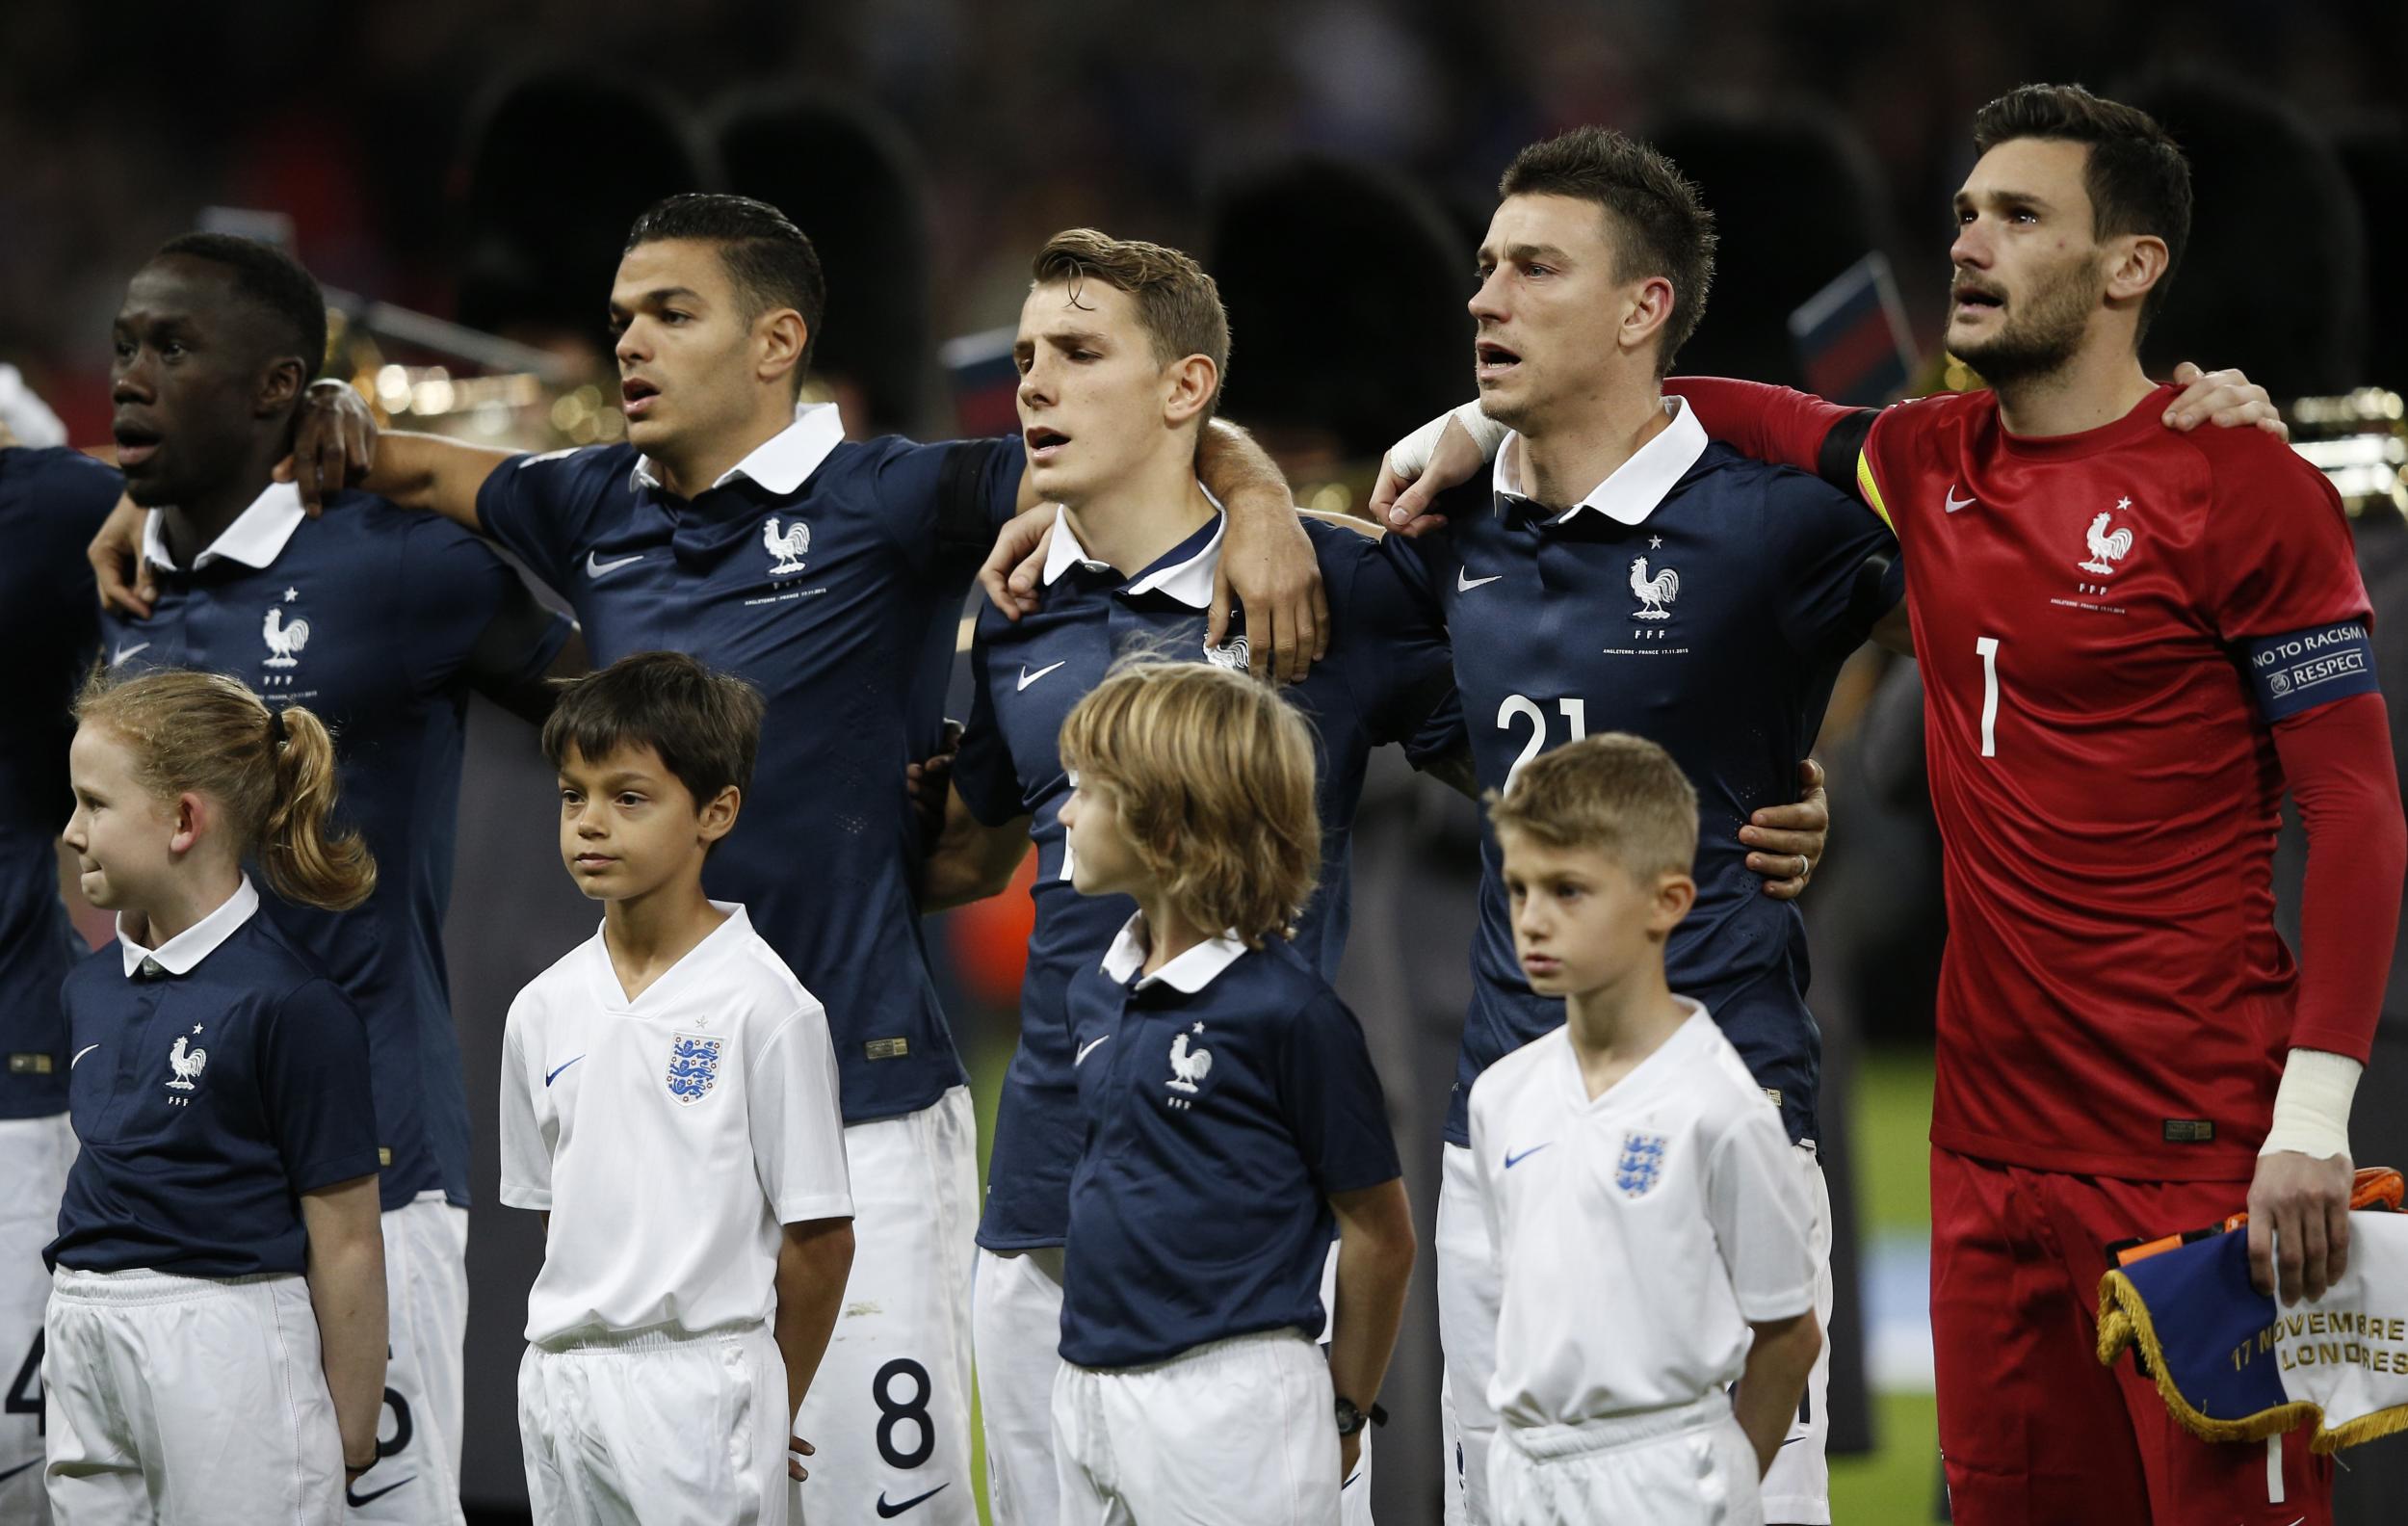 The French team during the rendition of 'La Marseillaise'